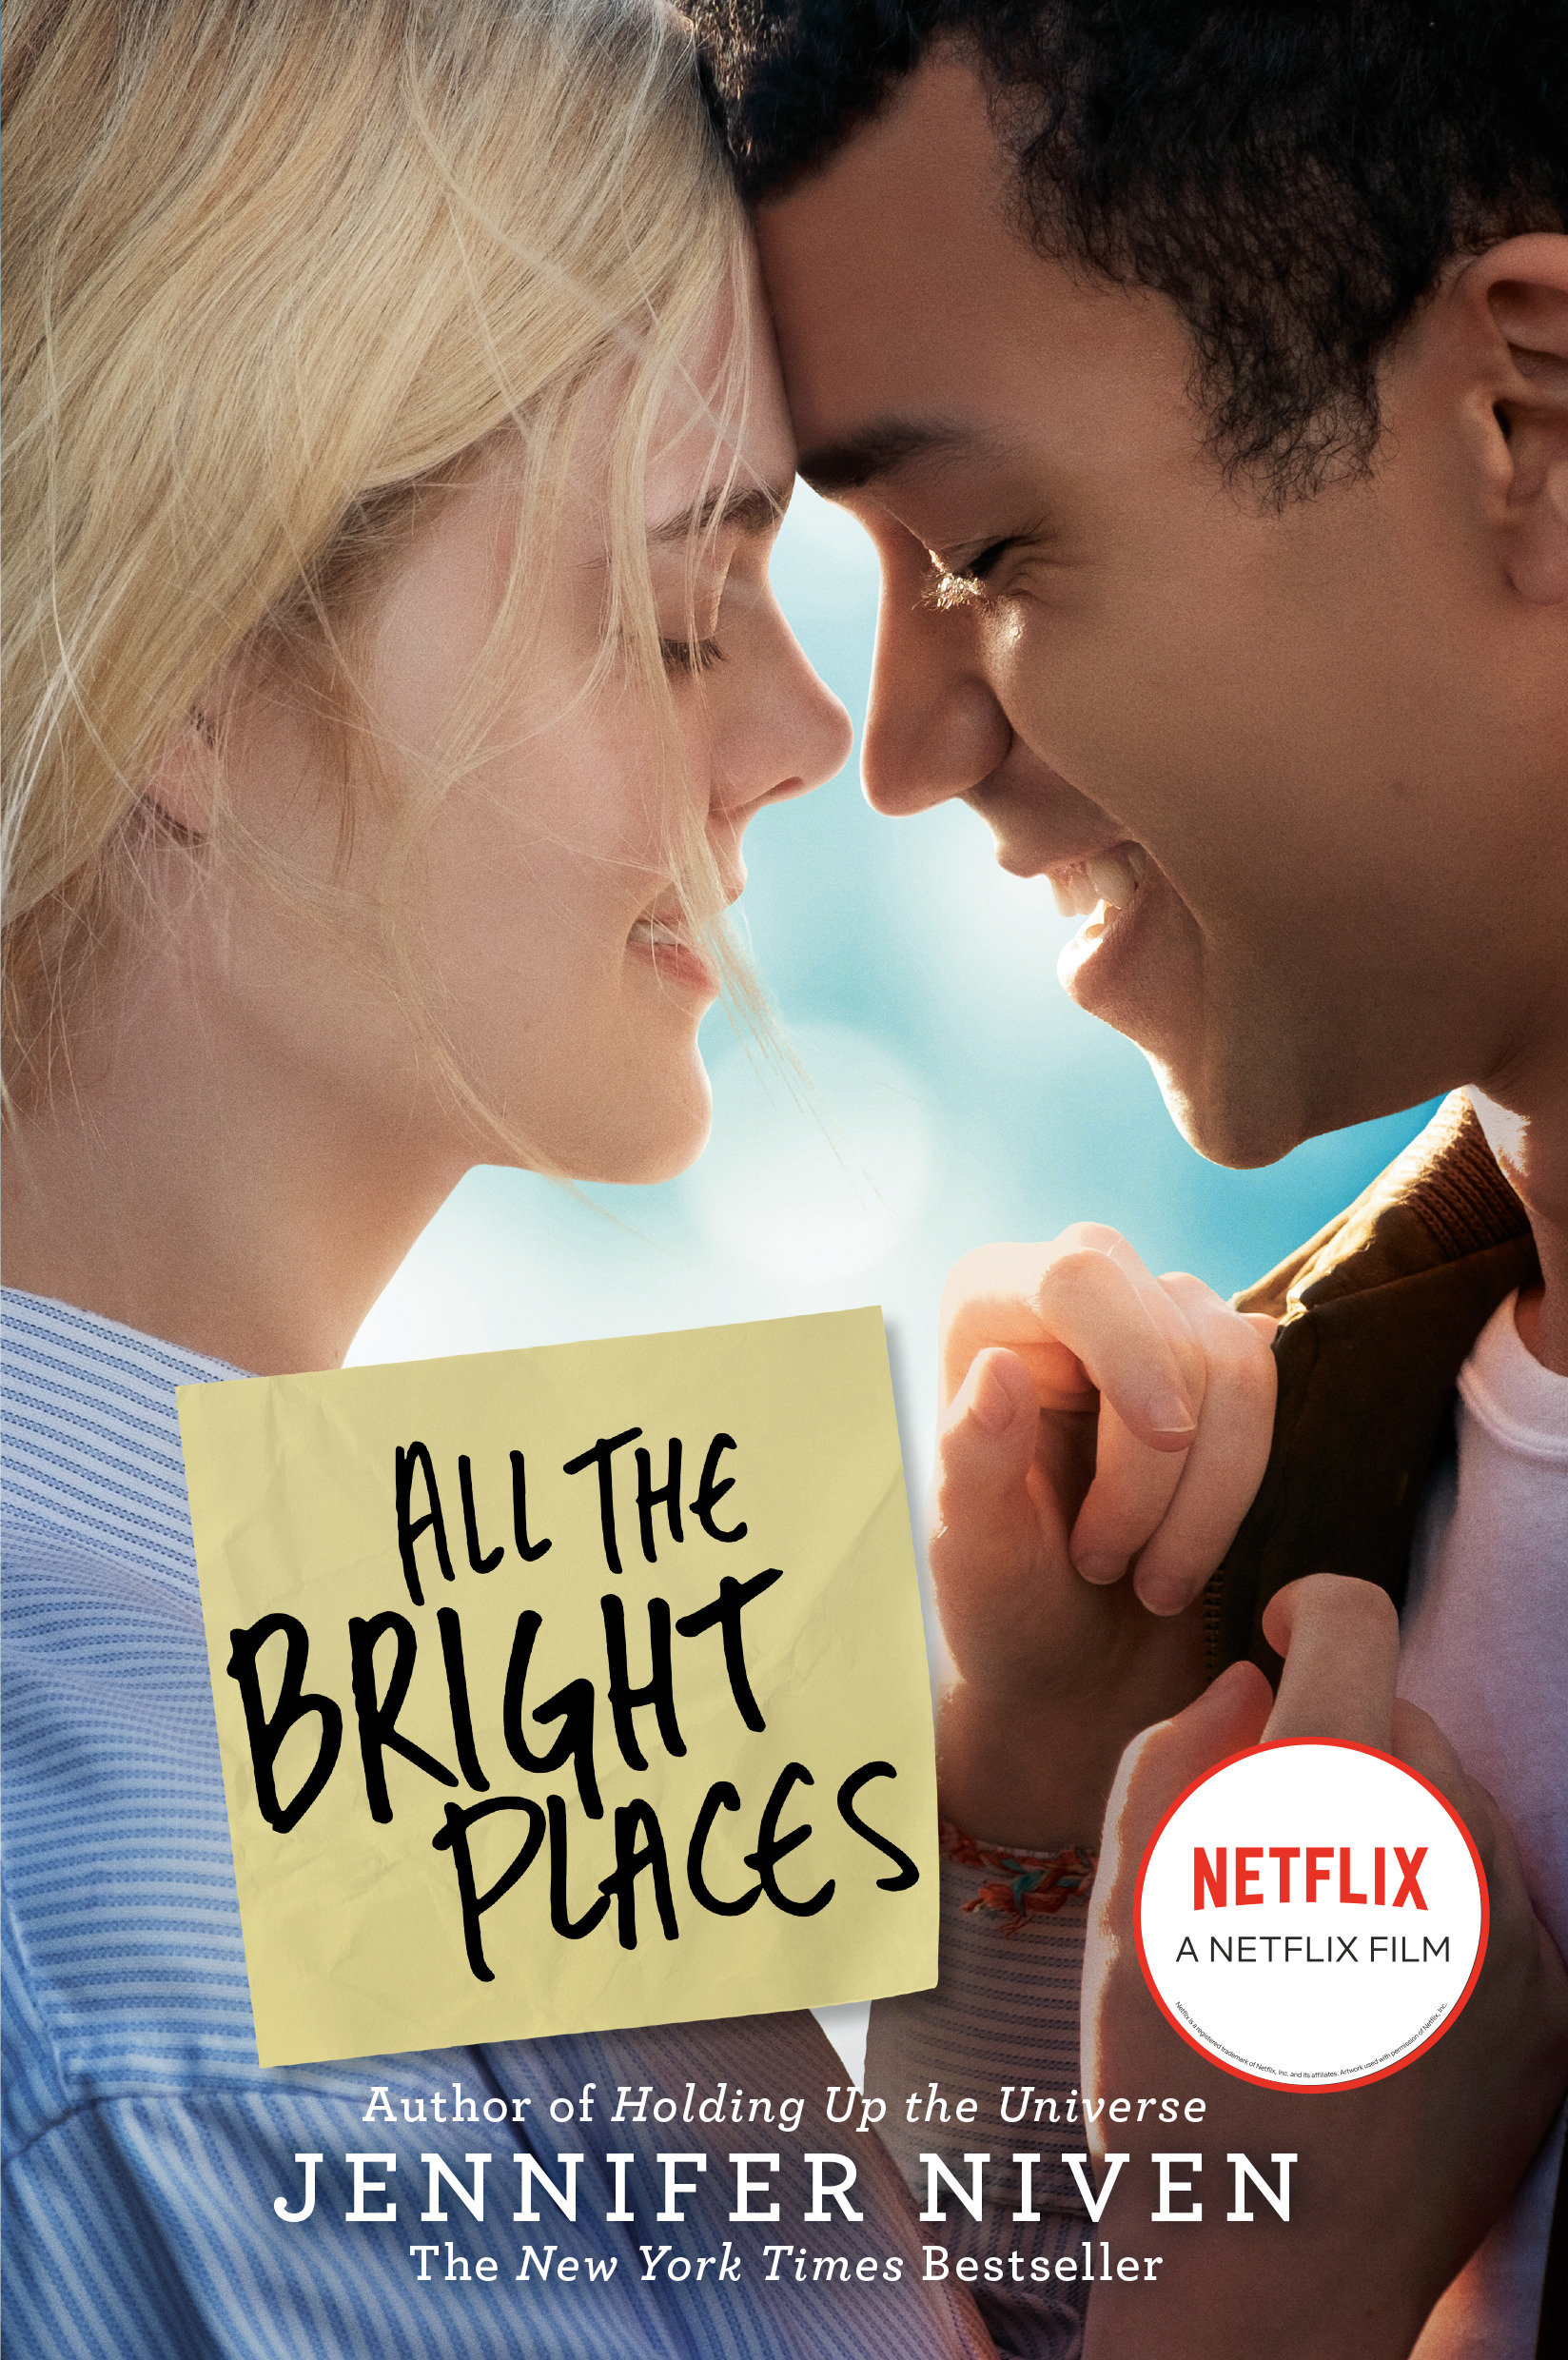 All the bright places cover image